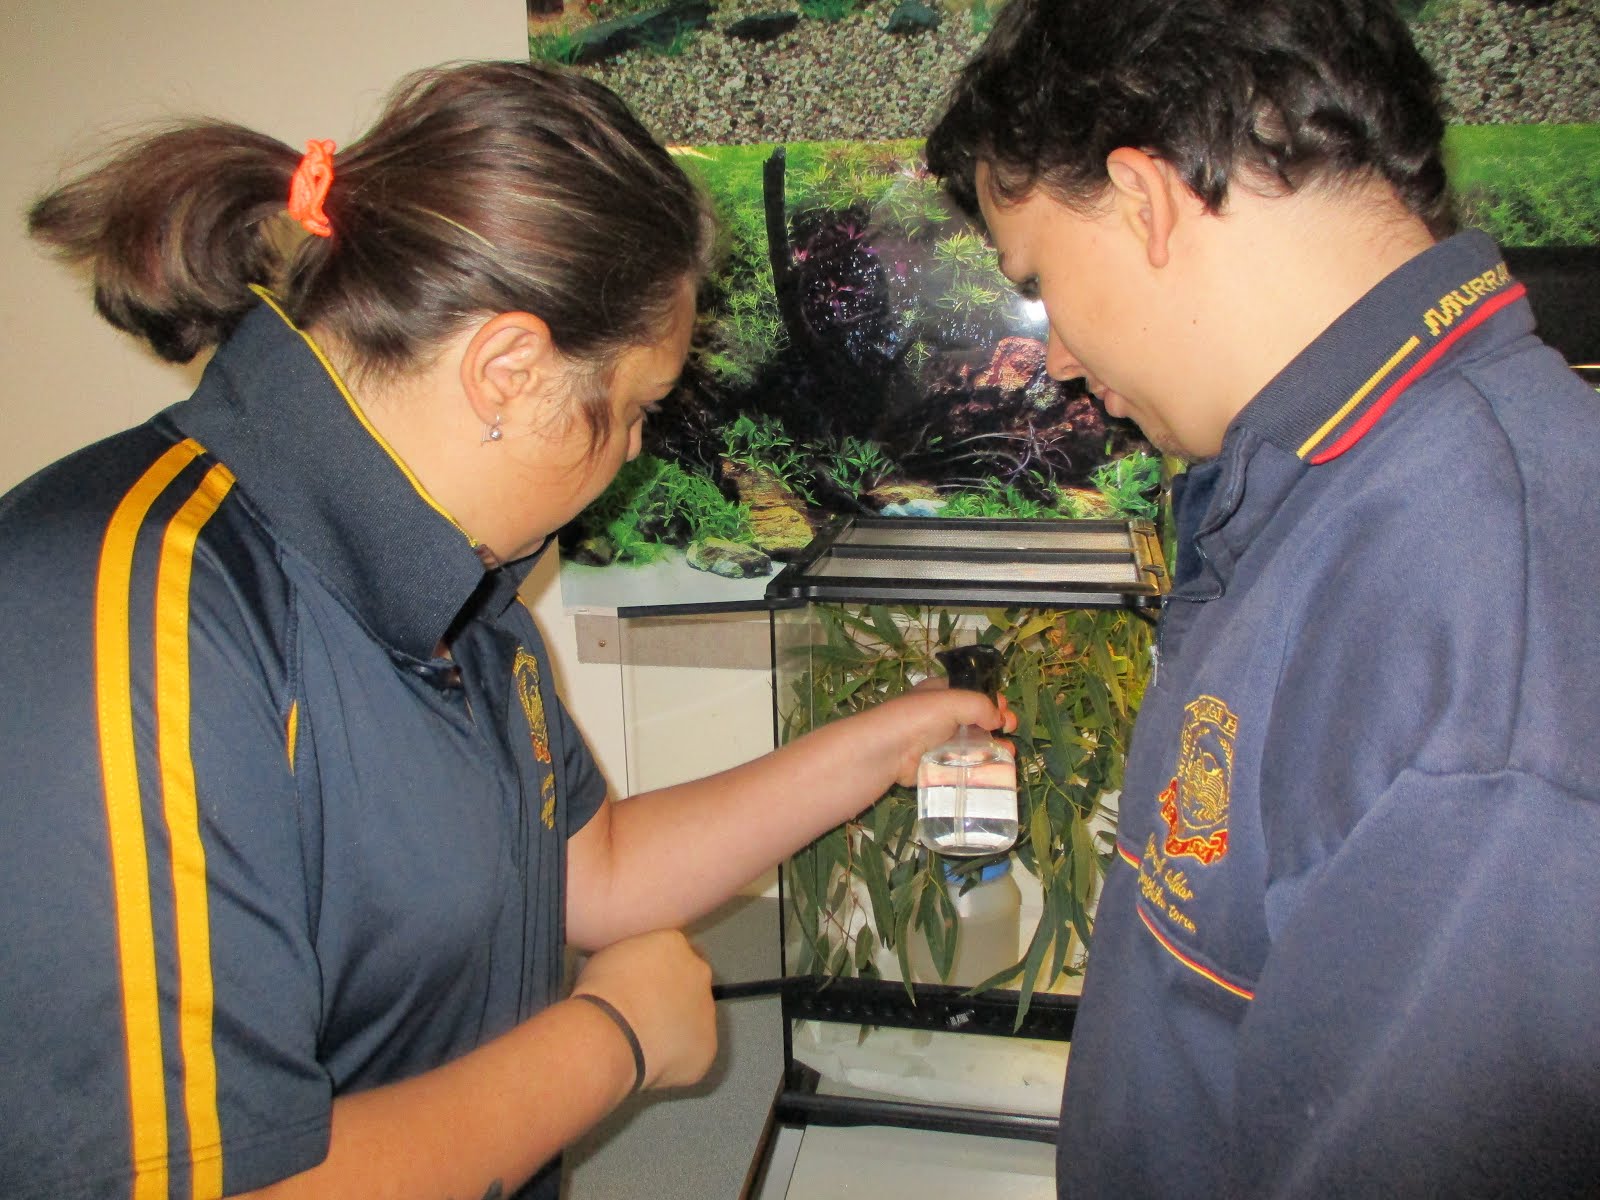 We enjoy taking care of the spiny leaf insects.